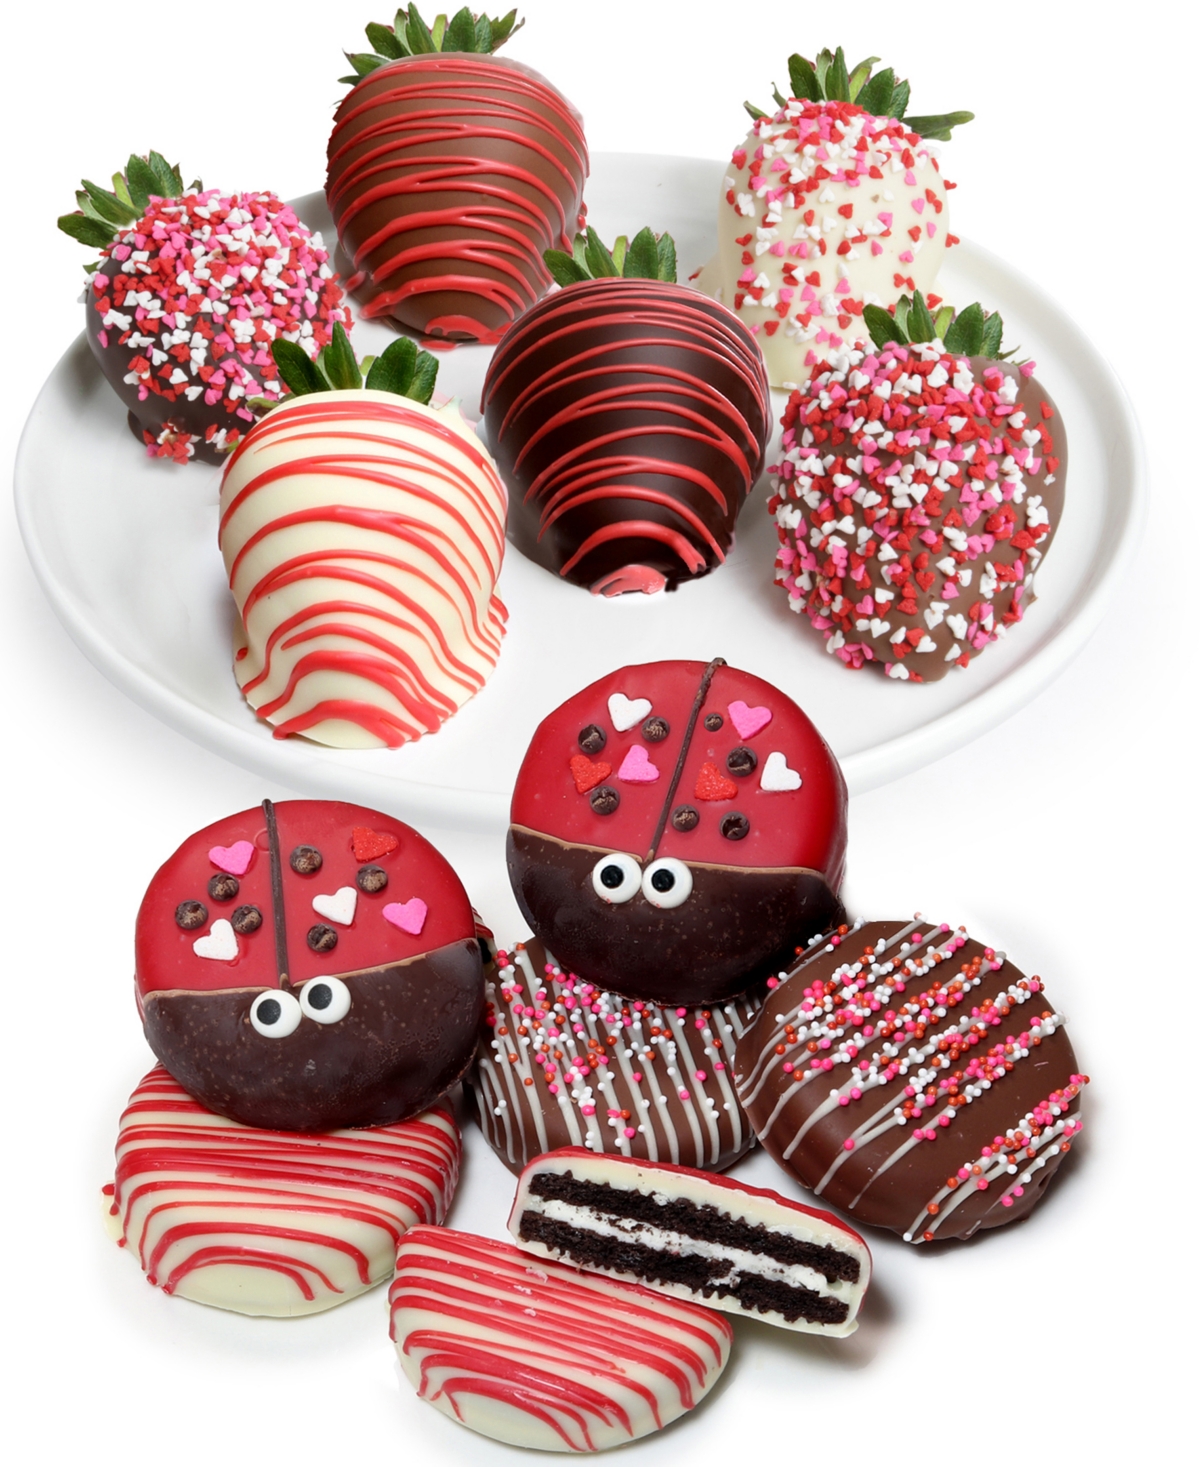 Chocolate Covered Company Love Bug Belgian Chocolate Covered Strawberries And Oreo Cookies In No Color